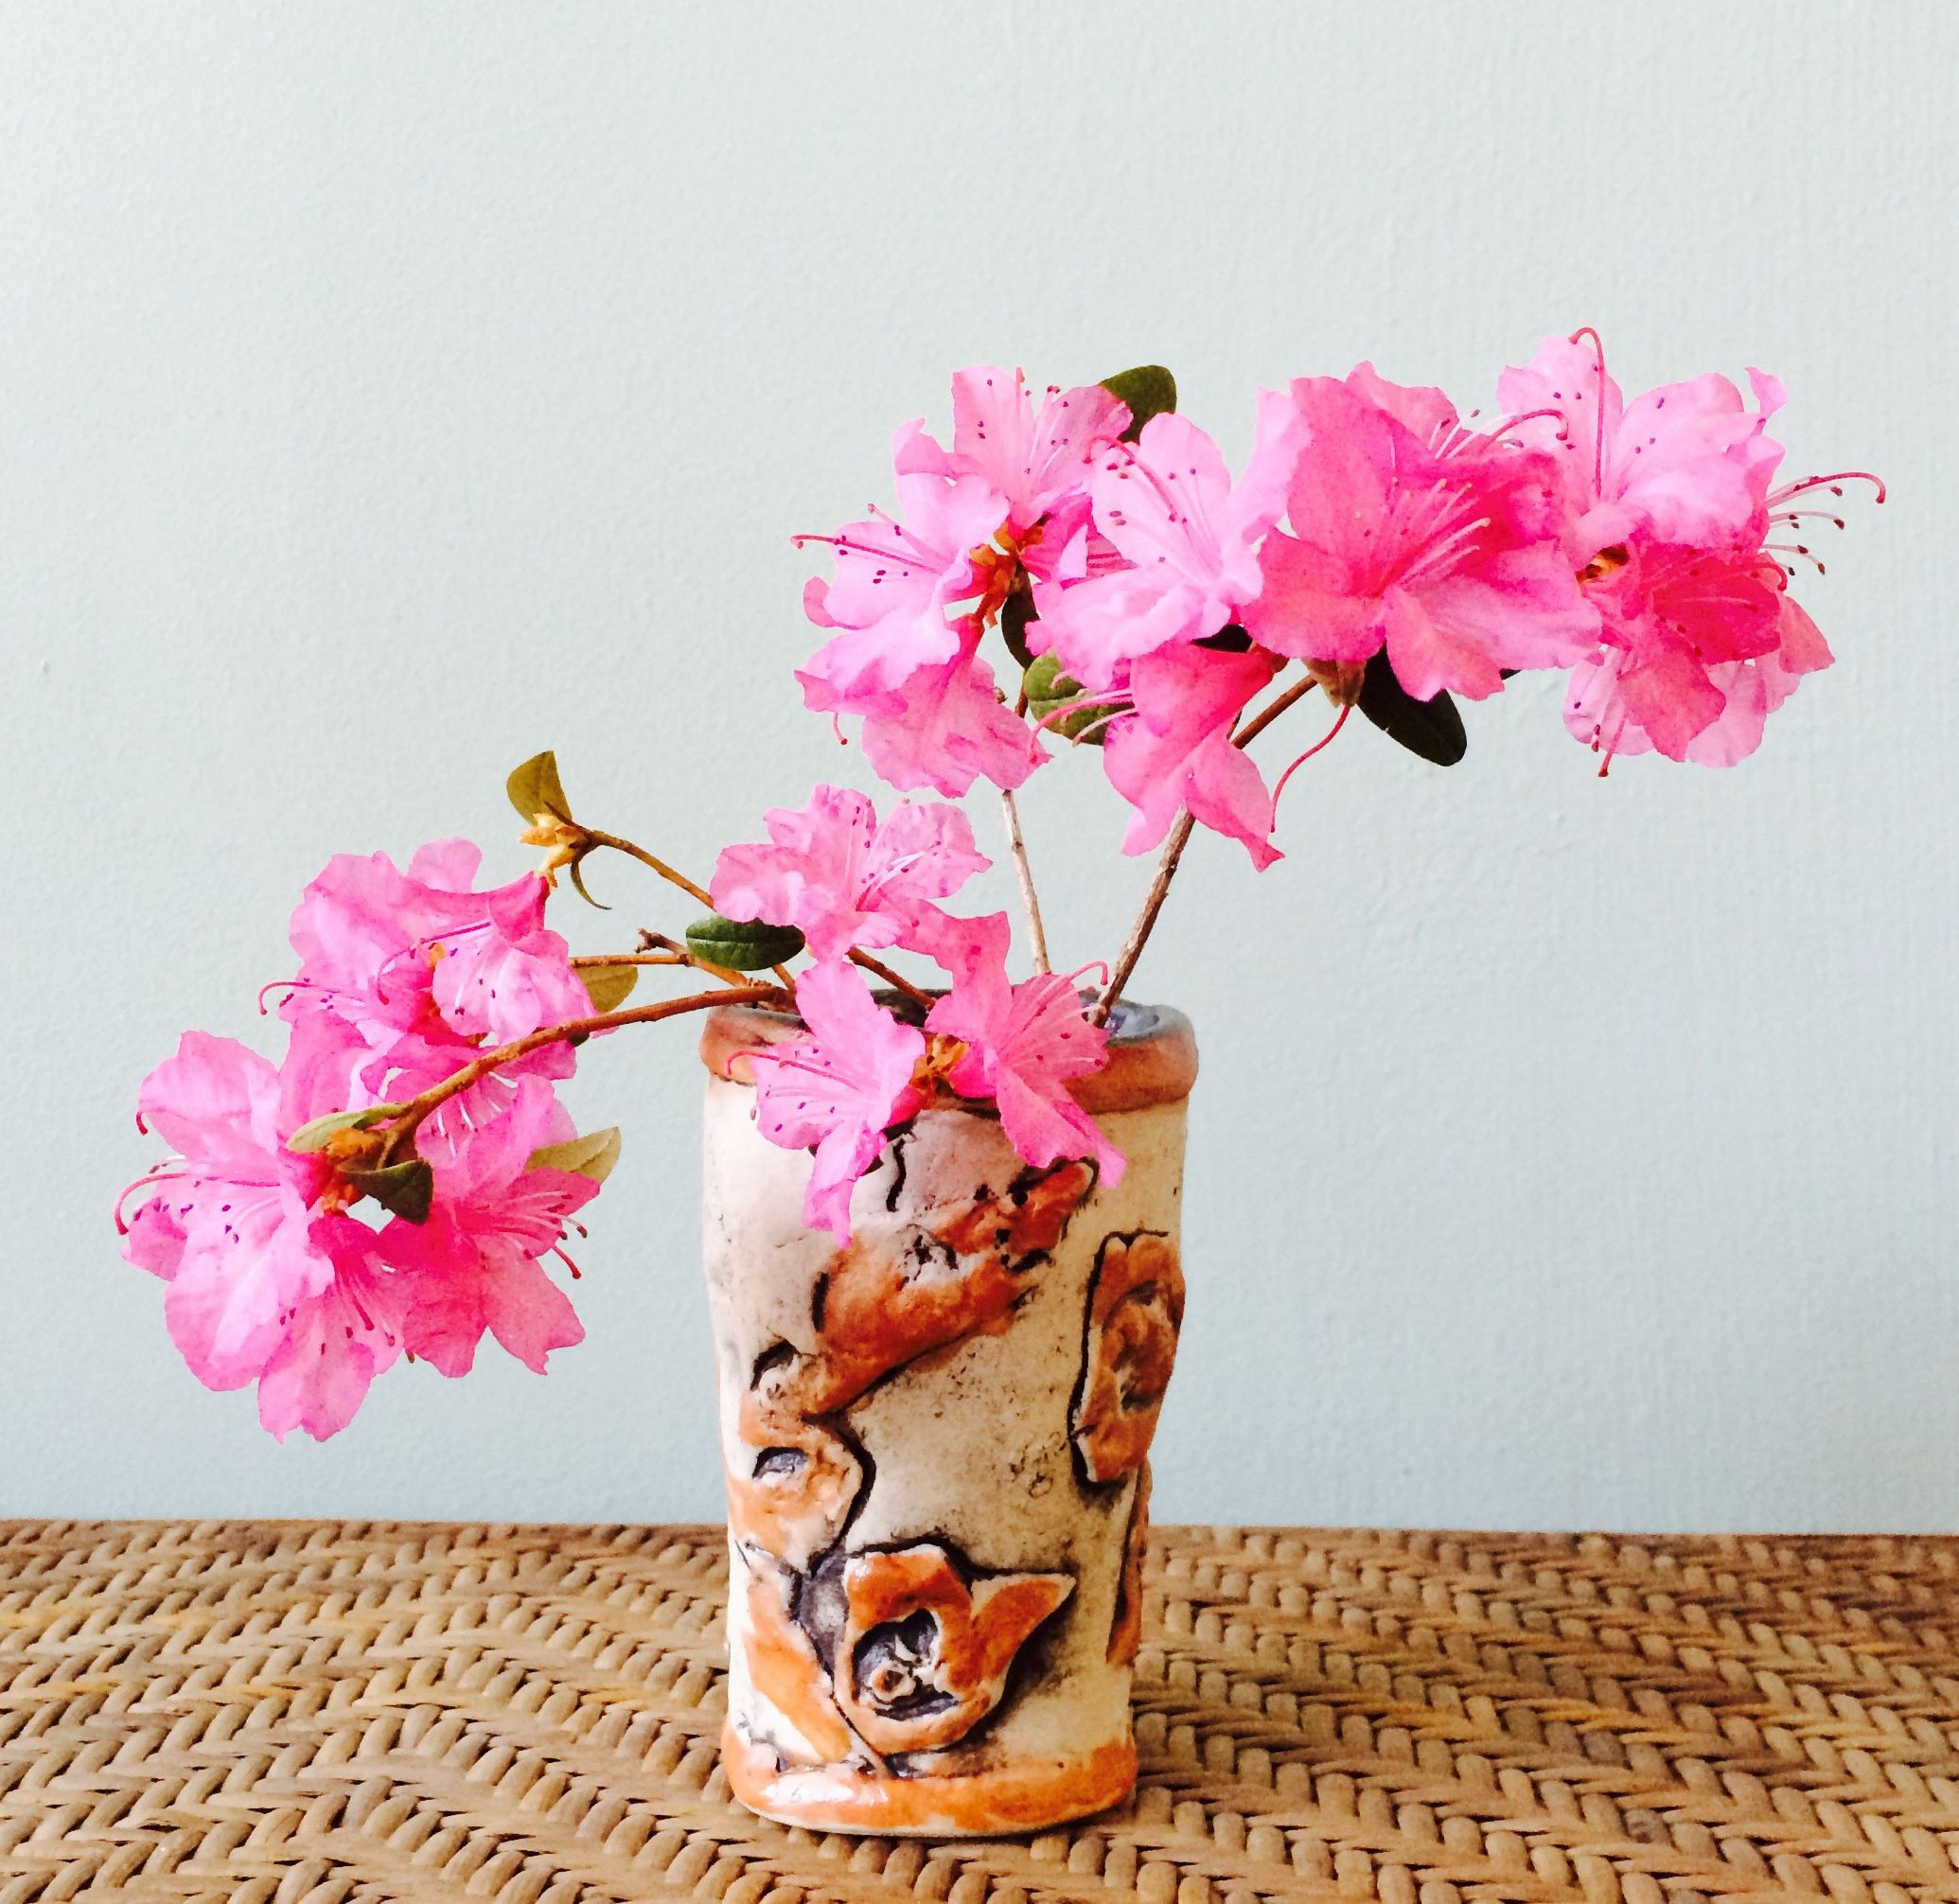 16 Great Artificial Cherry Blossom In Vase 2022 free download artificial cherry blossom in vase of there is a bit or perhaps a lot of wildness in my garden where throughout there is a bit or perhaps a lot of wildness in my garden where things grow with